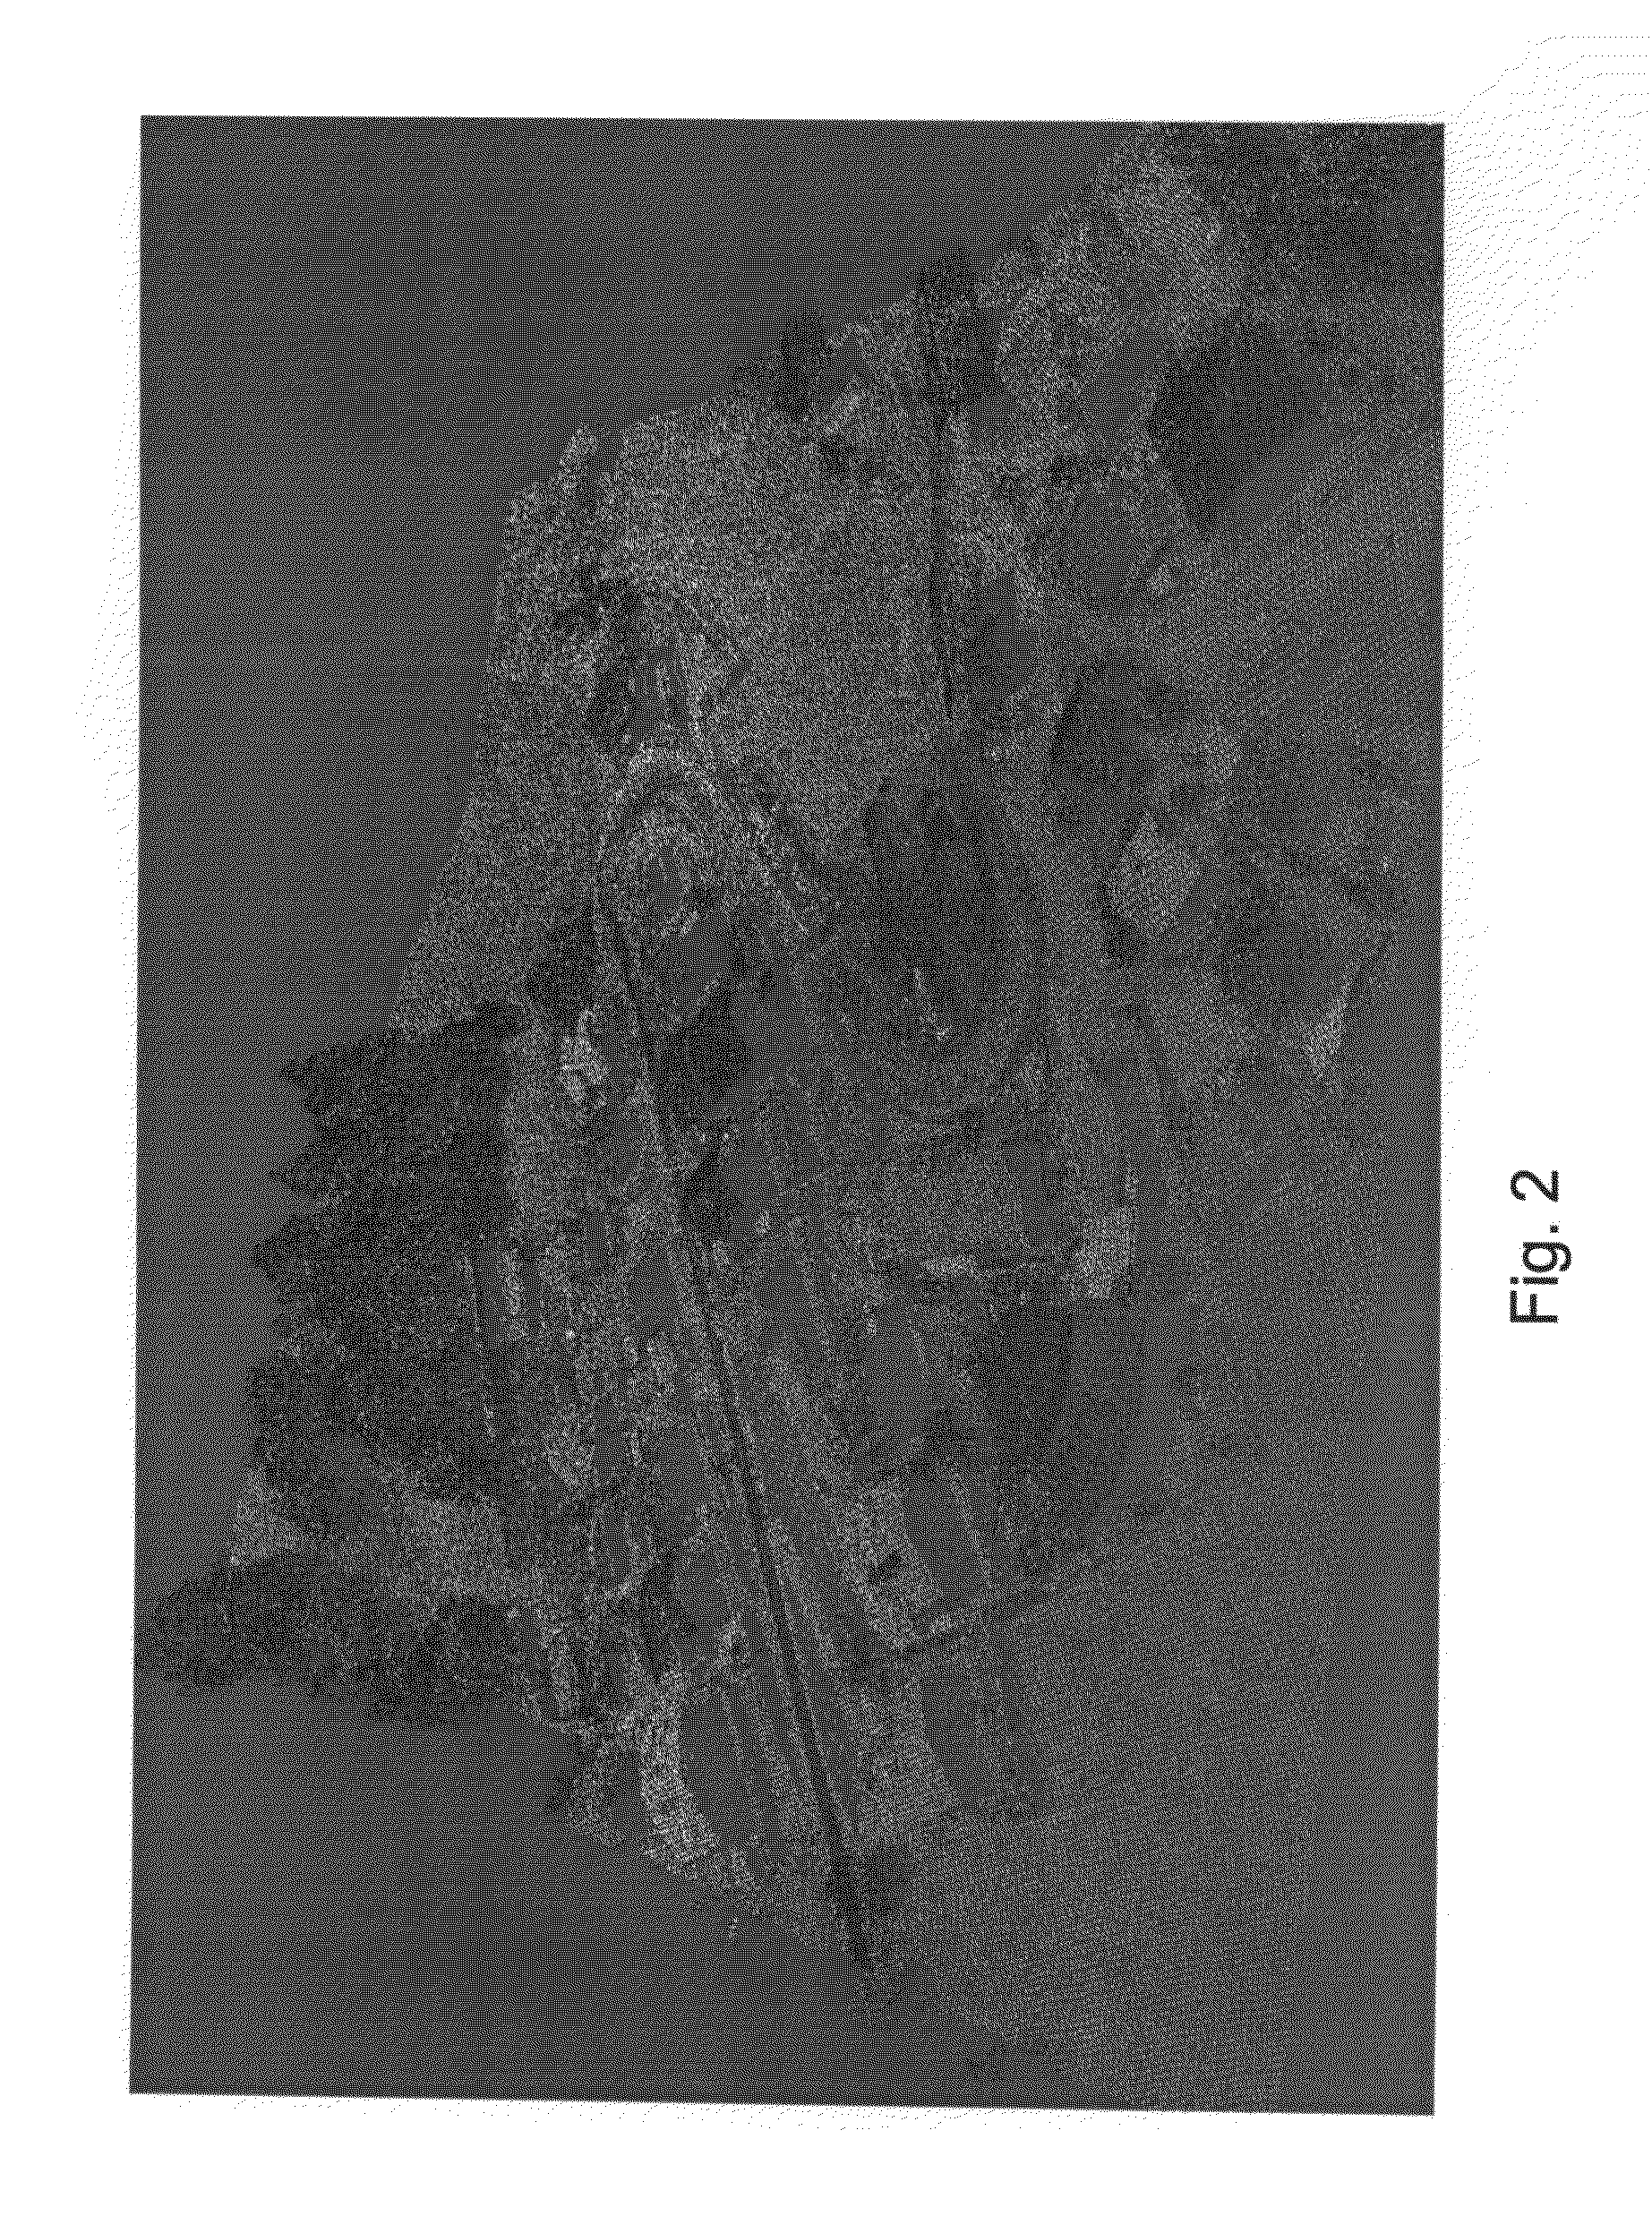 Apparatus and method for automatic airborne LiDAR data processing and mapping using data obtained thereby